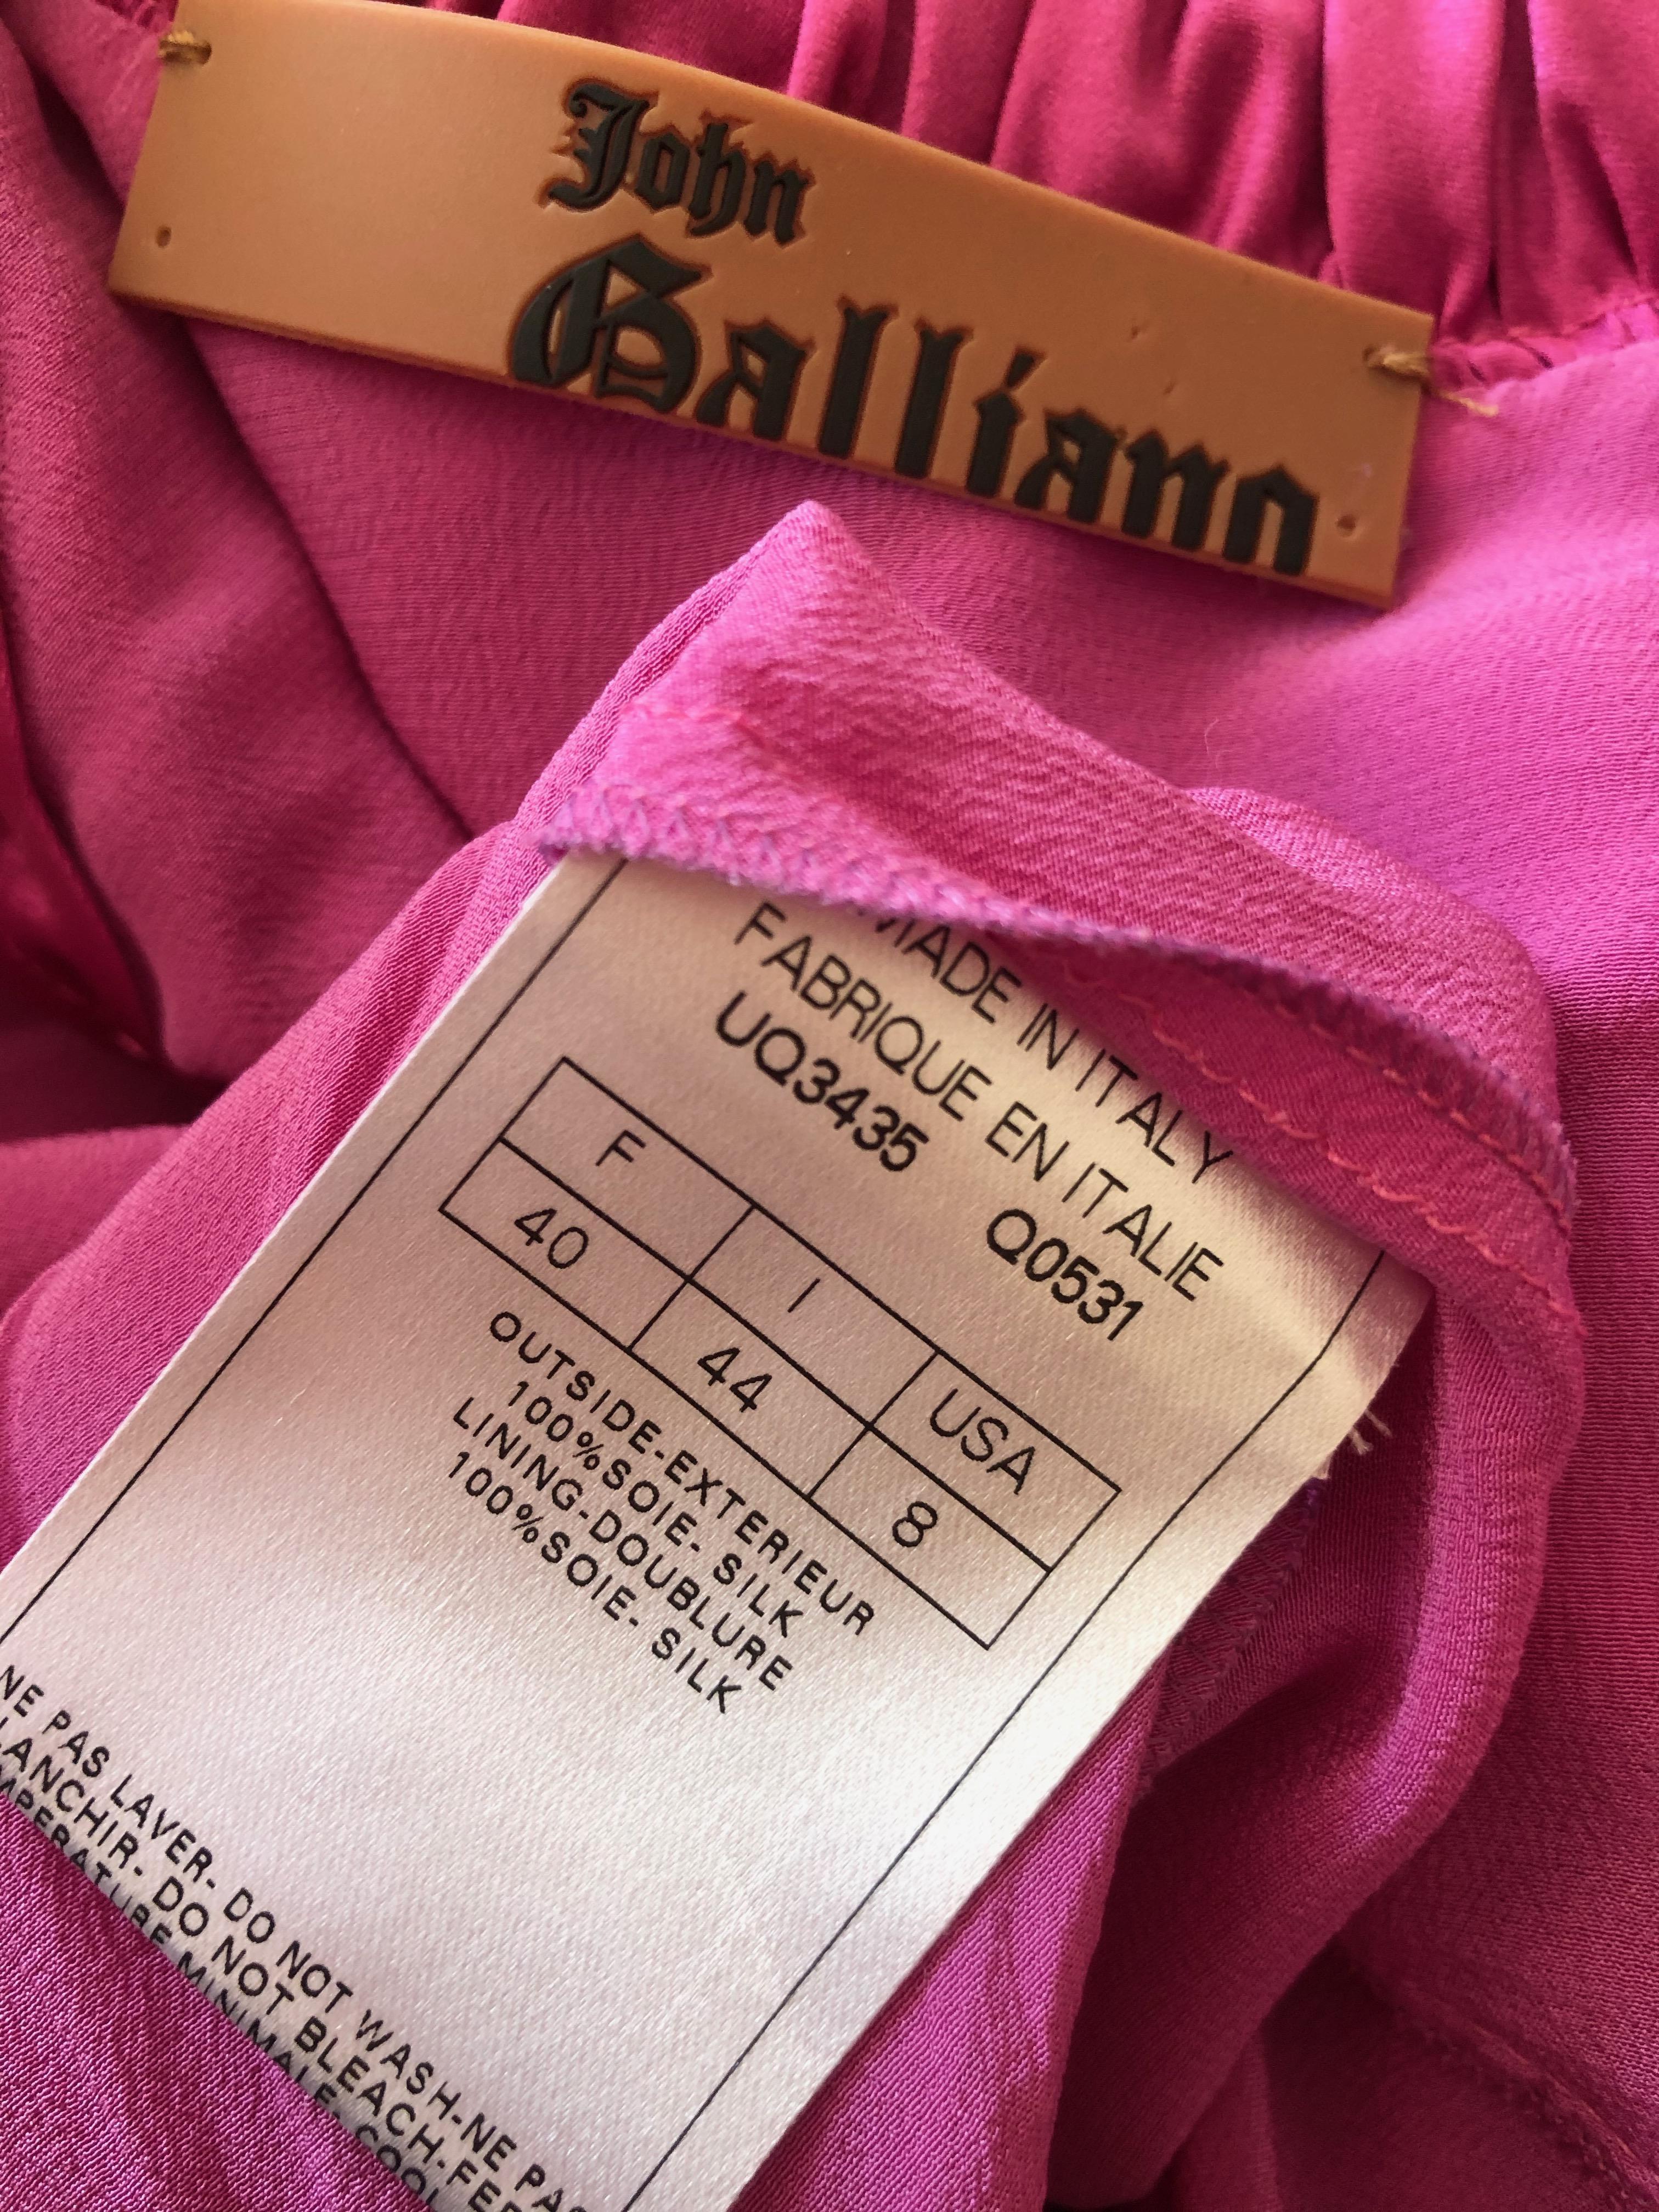   John Galliano Vintage Pink Low Cut Dress with Gathered Details For Sale 4